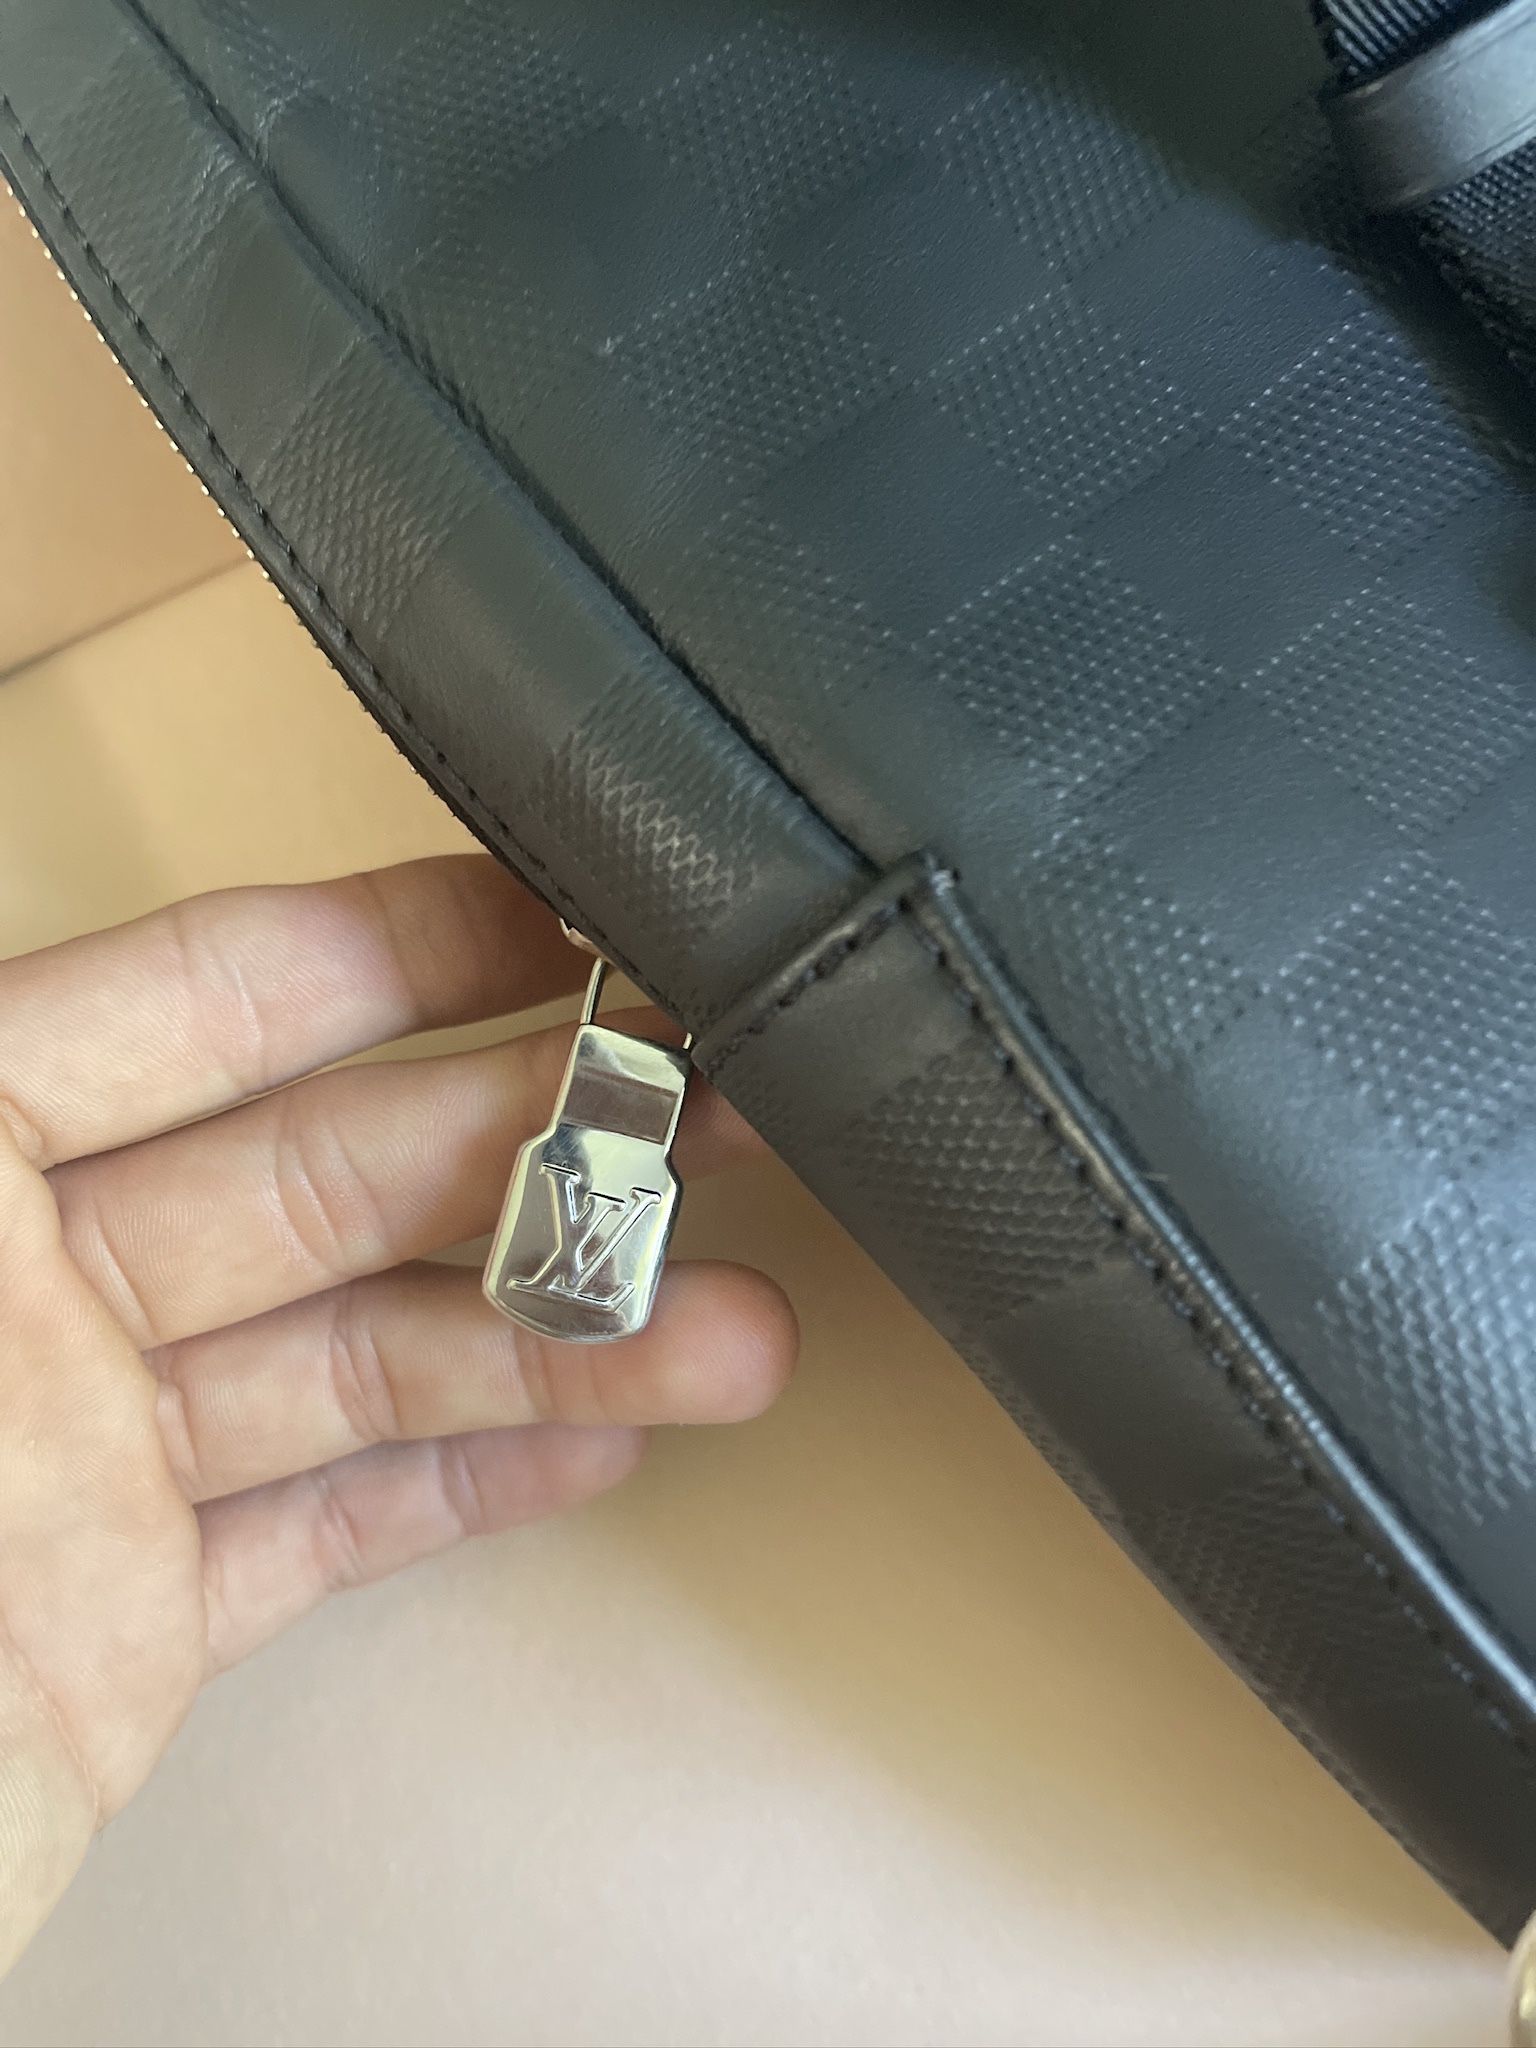 Louis Vuitton Avenue Sling Bag for Sale in Bridgewater, MA - OfferUp